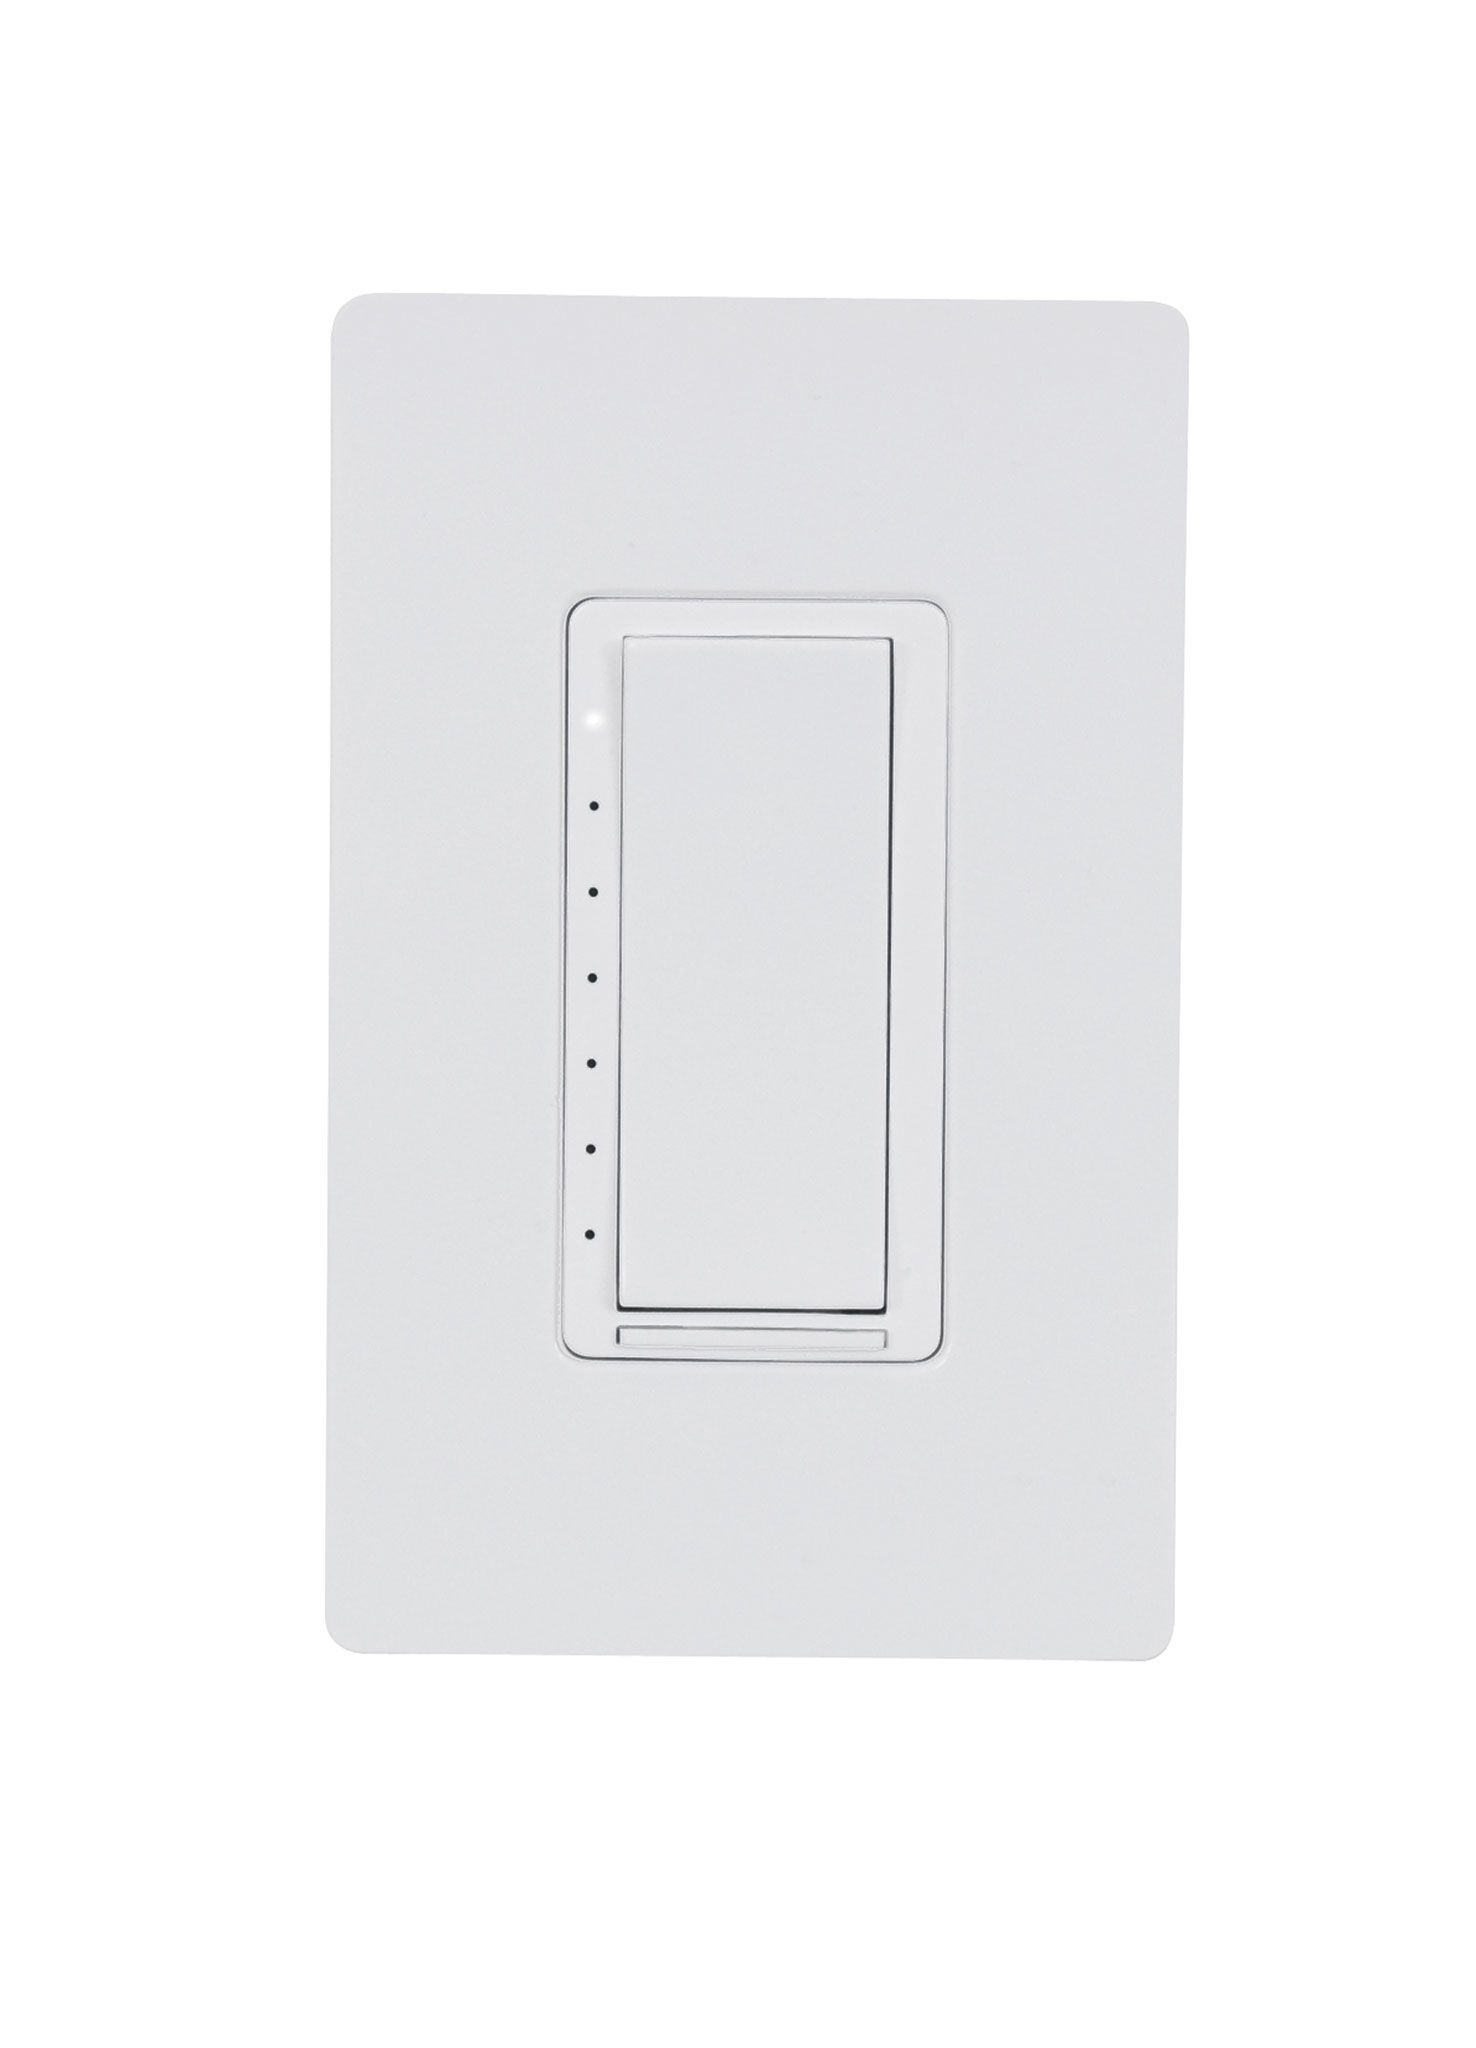 Crestron Wireless Lamp Dimmer w/Lamp Switch Control Input, 120V, White